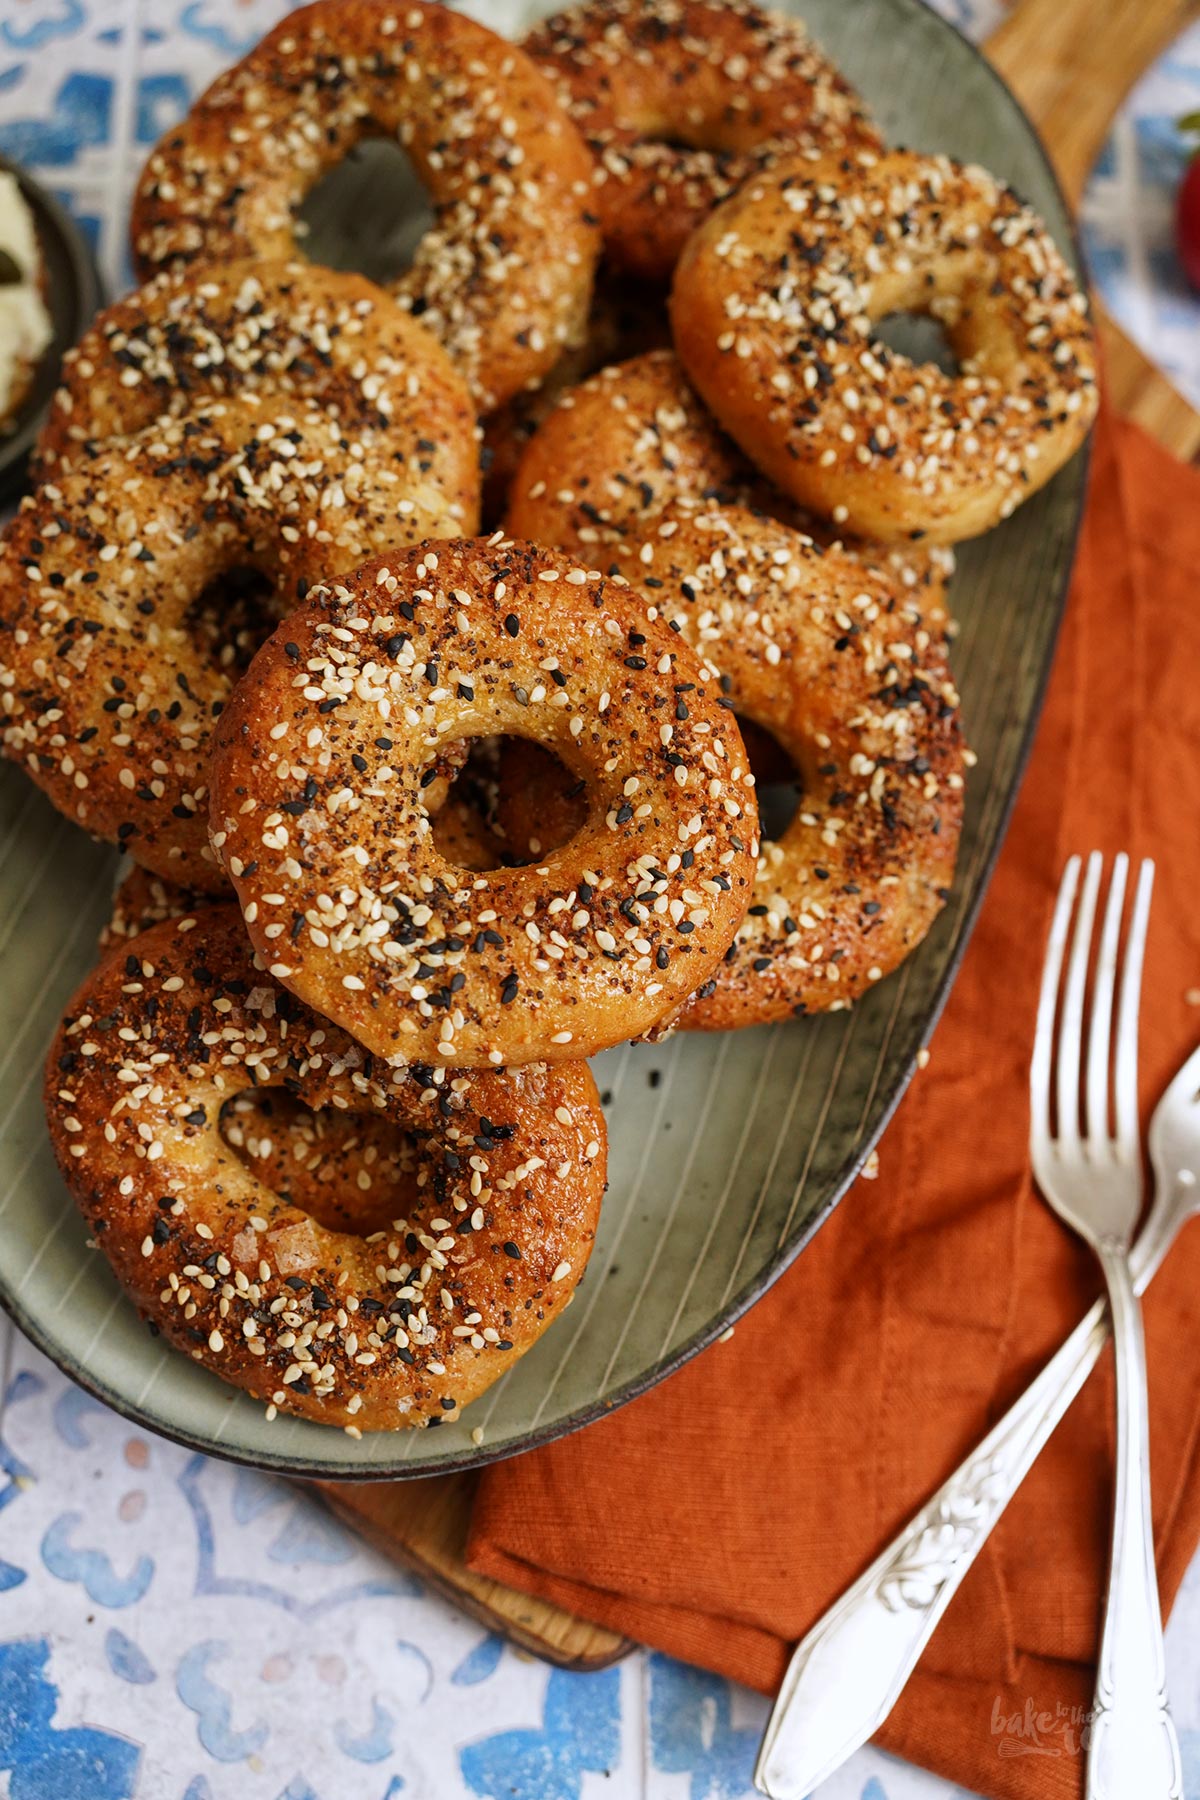 Homemade Mini "Everything" Bagel | Bake to the roots